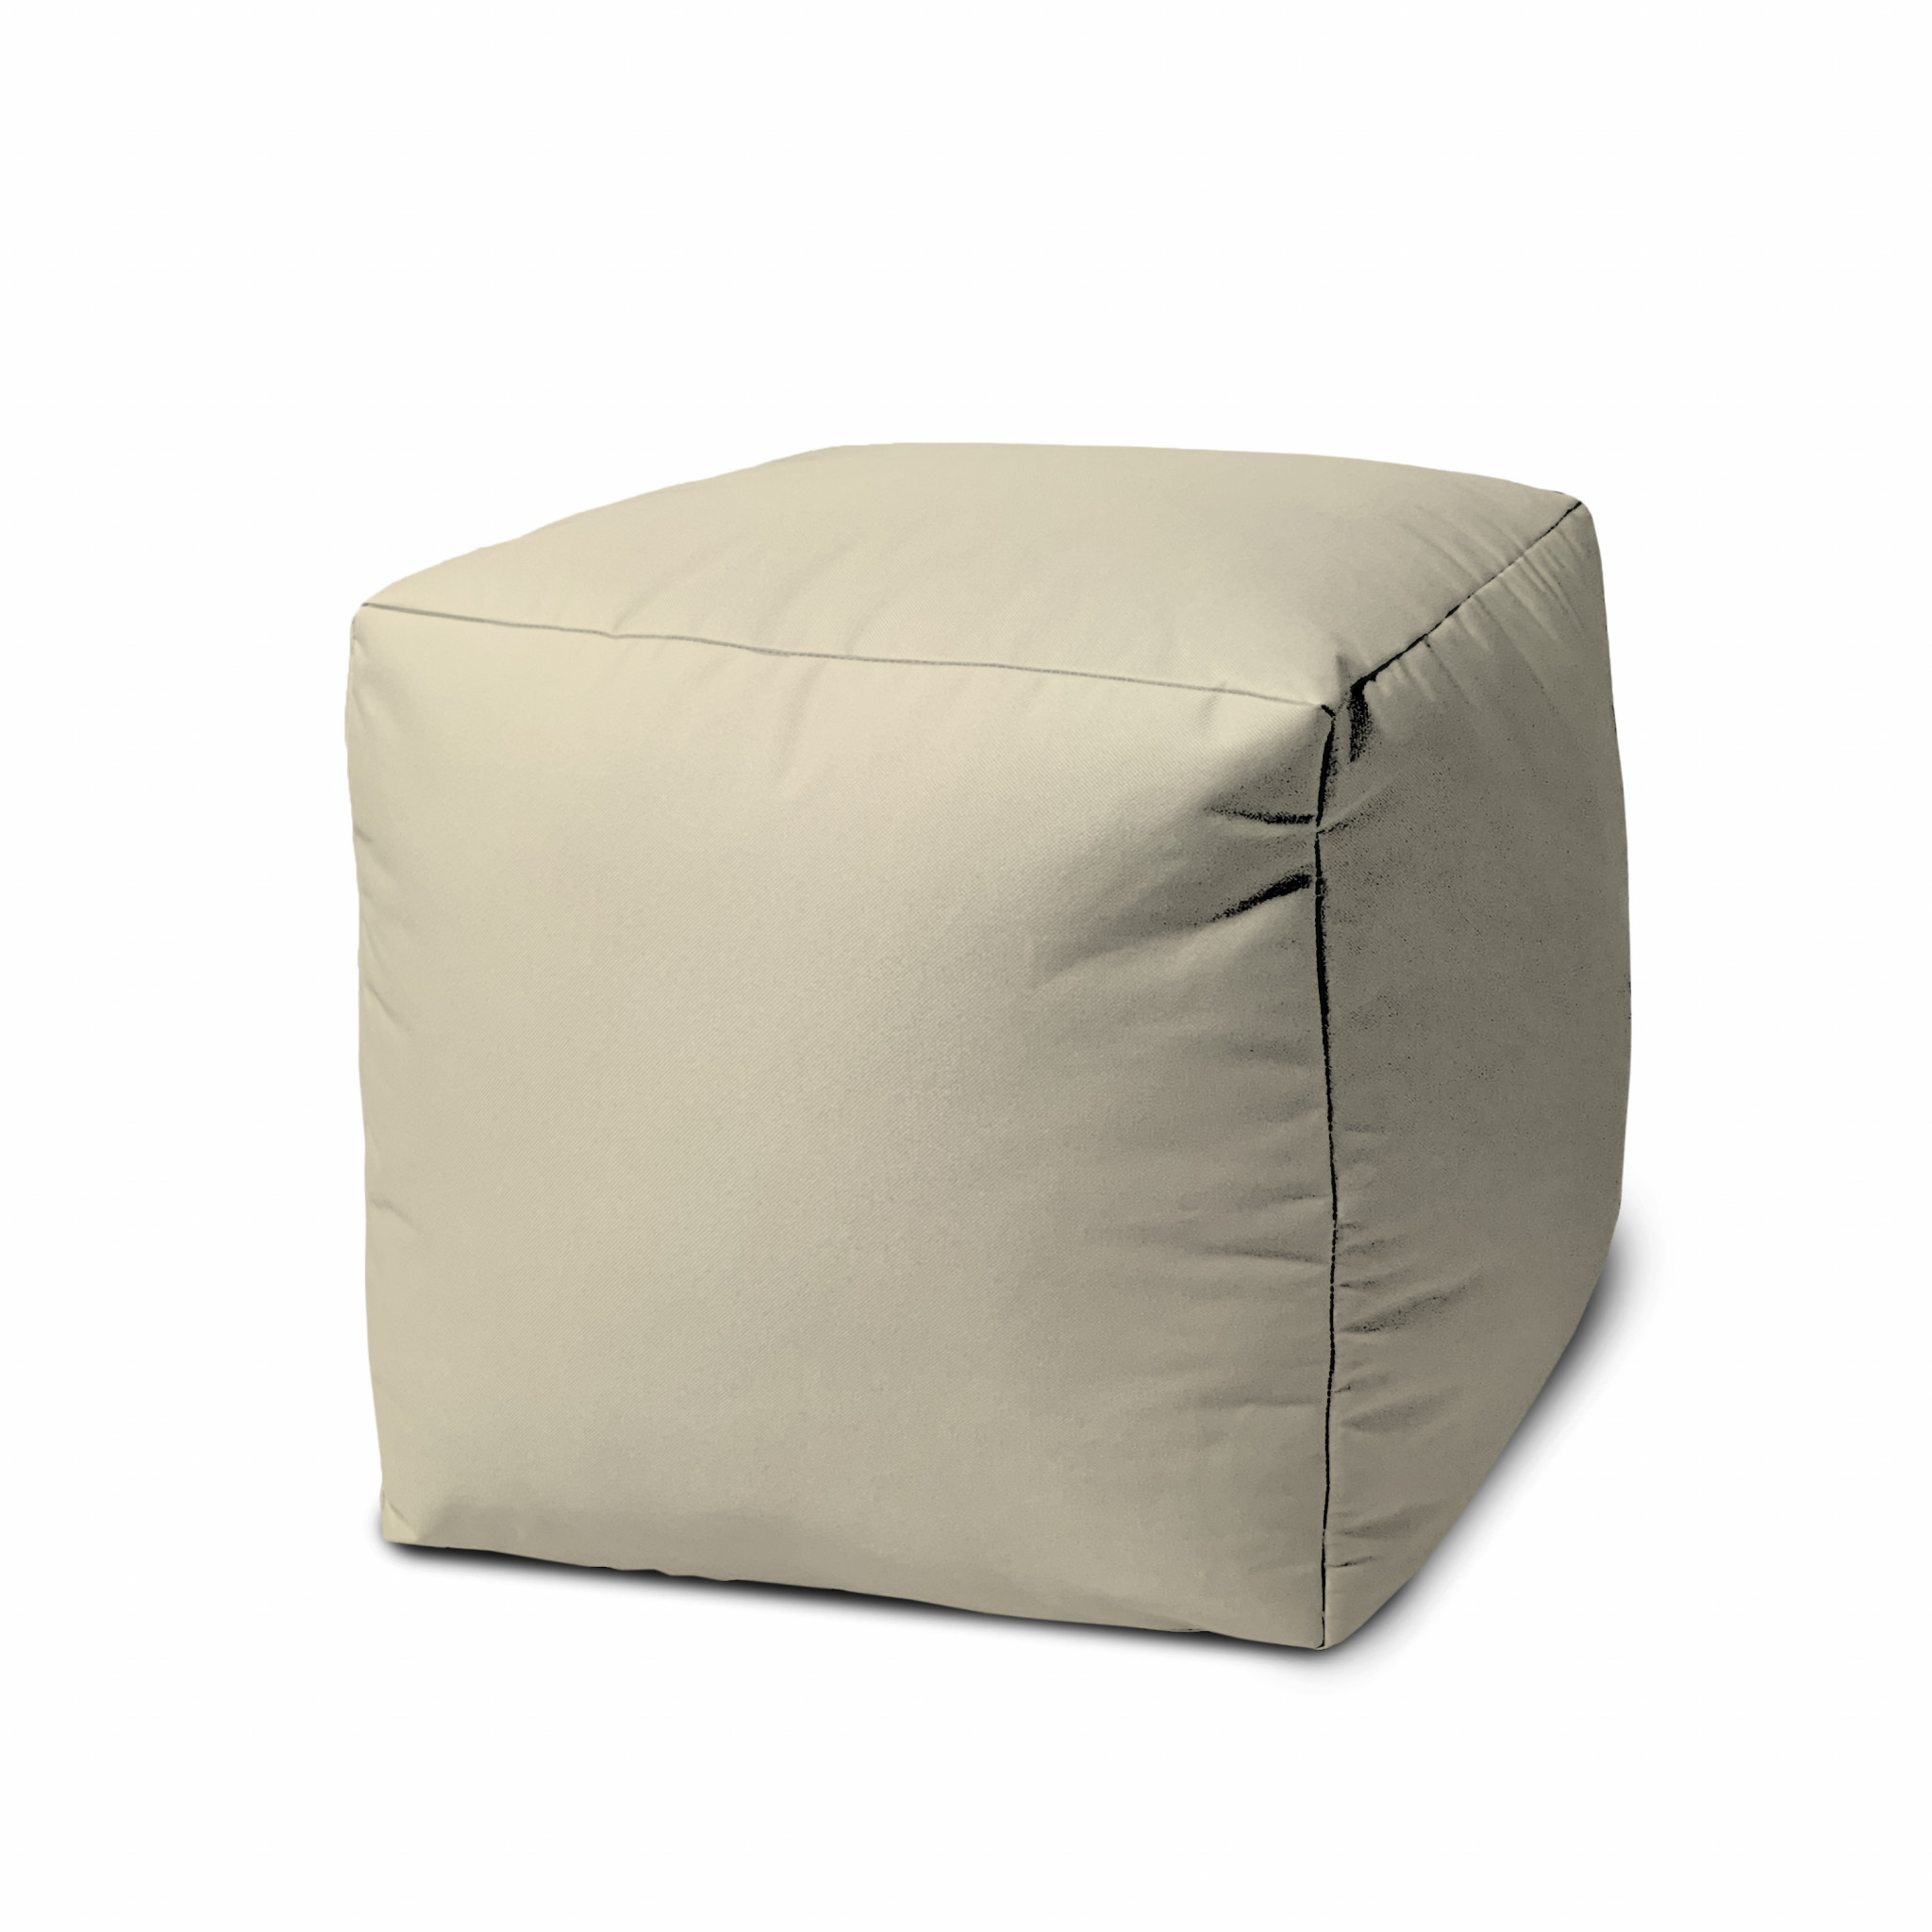 17" Cool Neutral Ivory Solid Color Indoor Outdoor Pouf Ottoman-474132-1